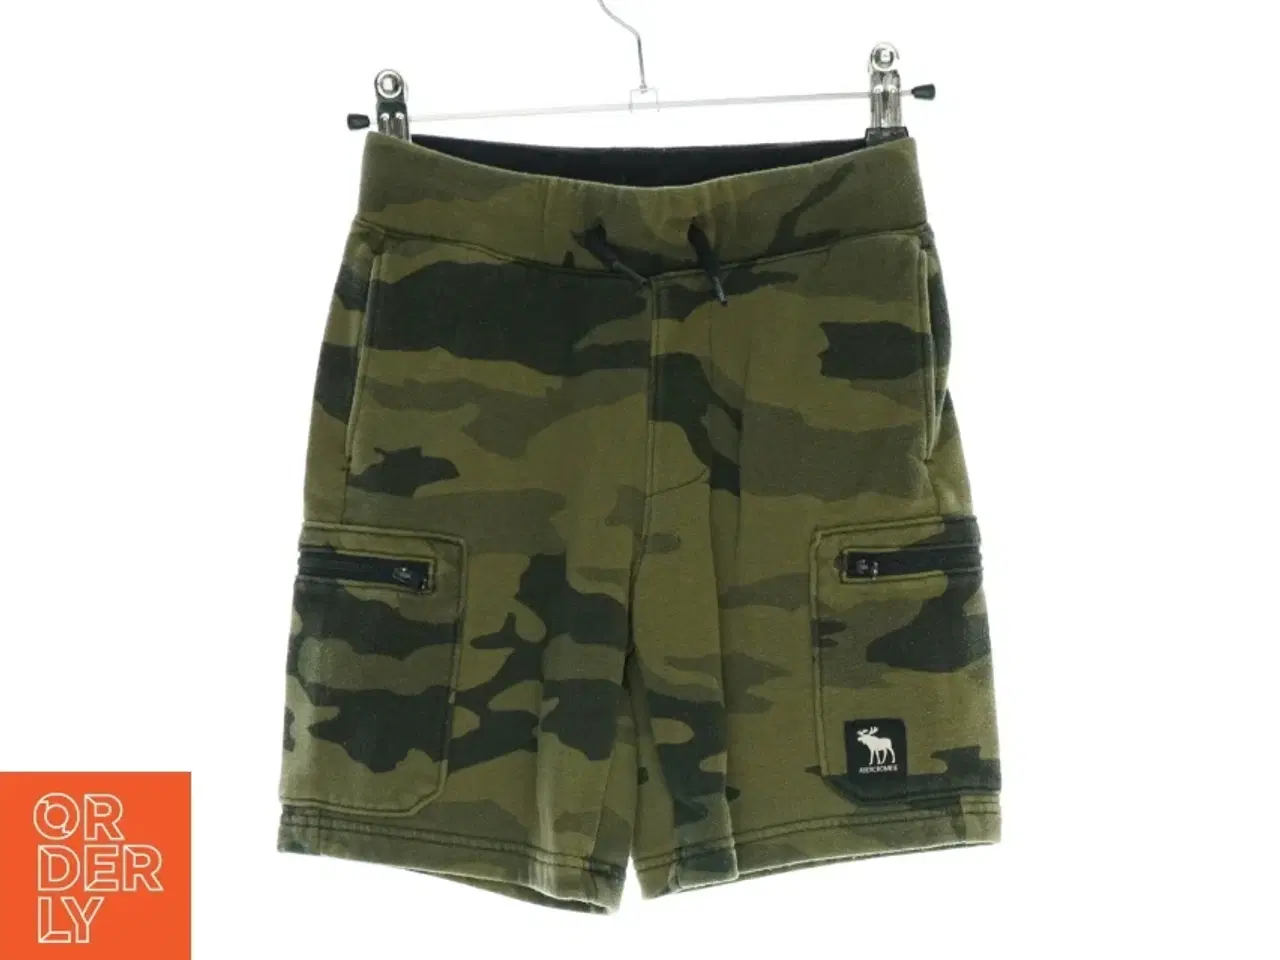 Billede 1 - Shorts fra Abercrombie and Fitch